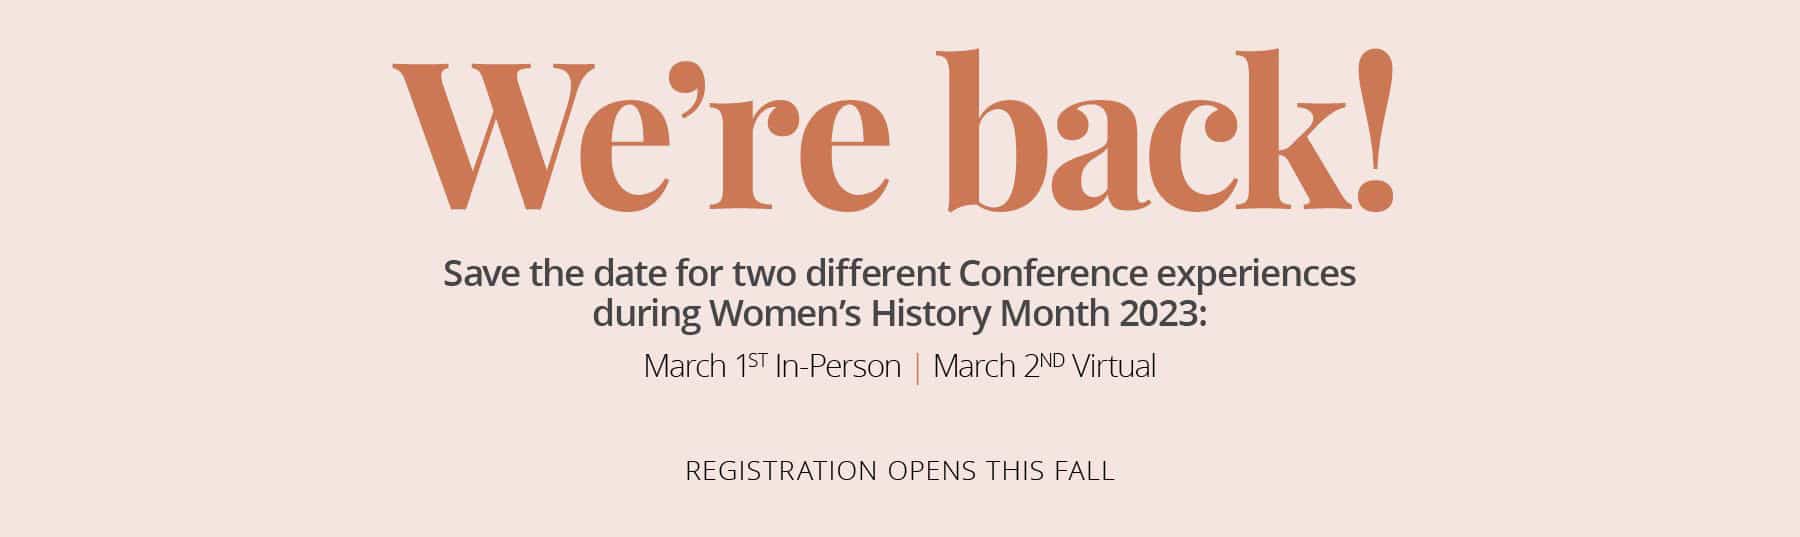 We're back! Save the date for TWO Conference experiences taking place virtually and in-person on March 1st and March 2nd!